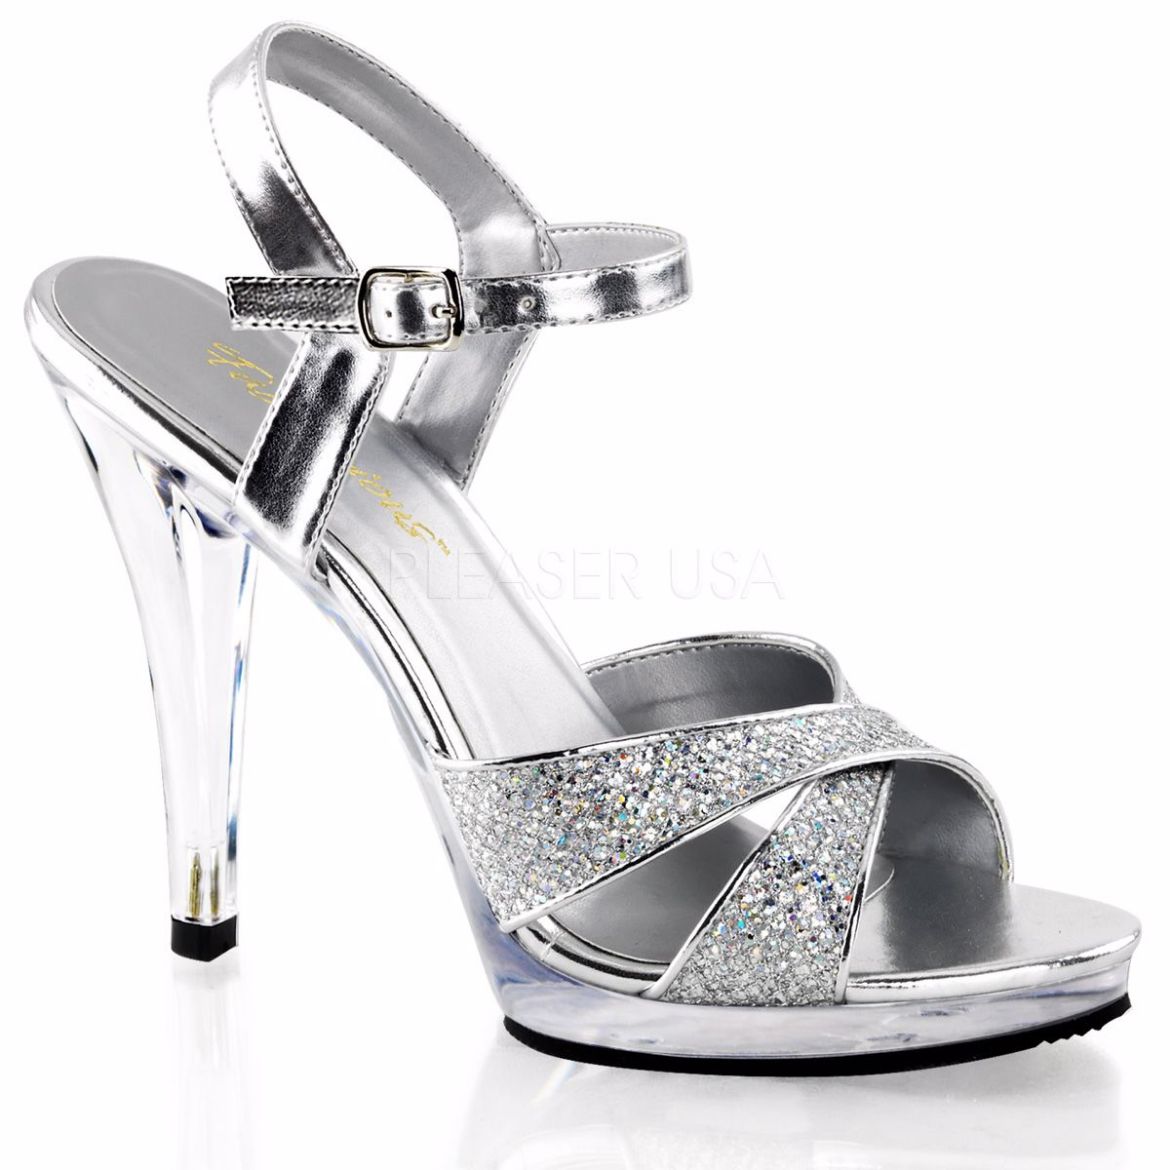 Product image of Fabulicious Flair-419(G) Silver Multi Glitter/Clear, 4 1/2 inch (11.4 cm) Heel, 1/2 inch (1.3 cm) Platform Sandal Shoes